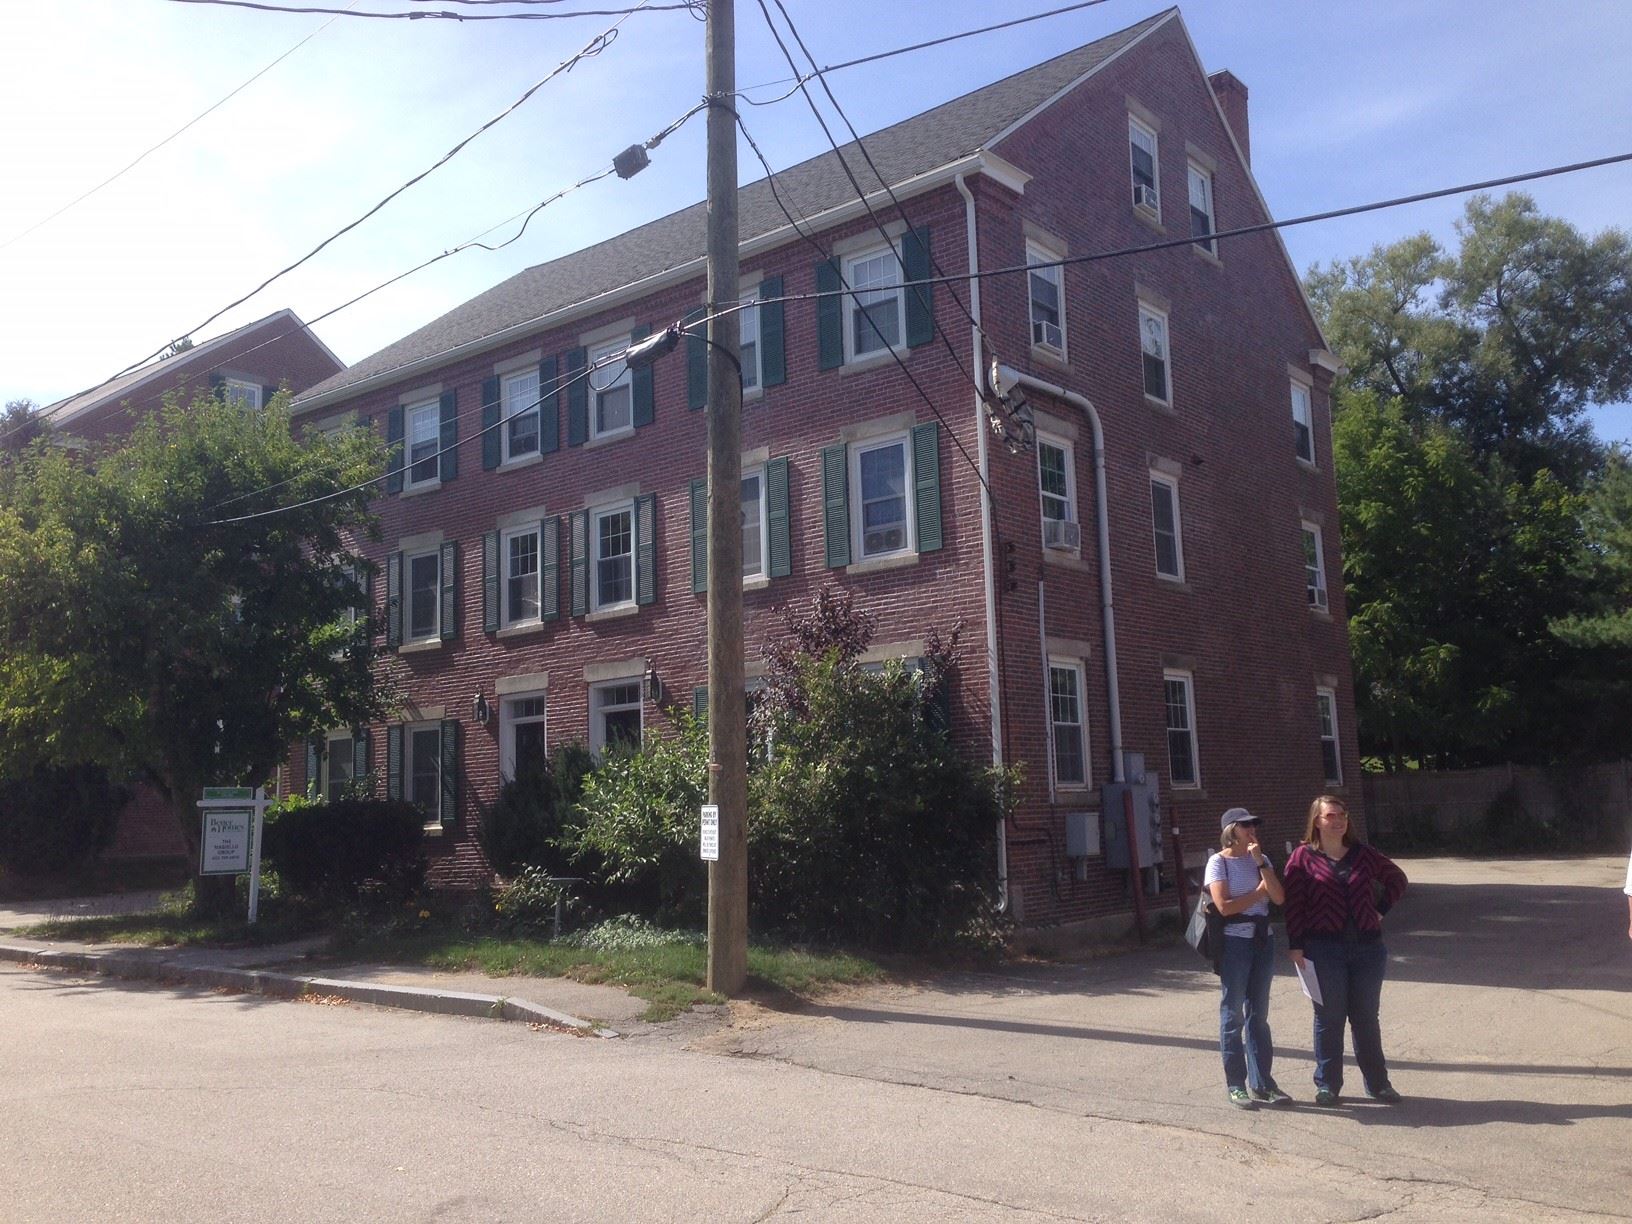 Members of the New England Chapter of the VAF examine worker housing in a textile mill village.